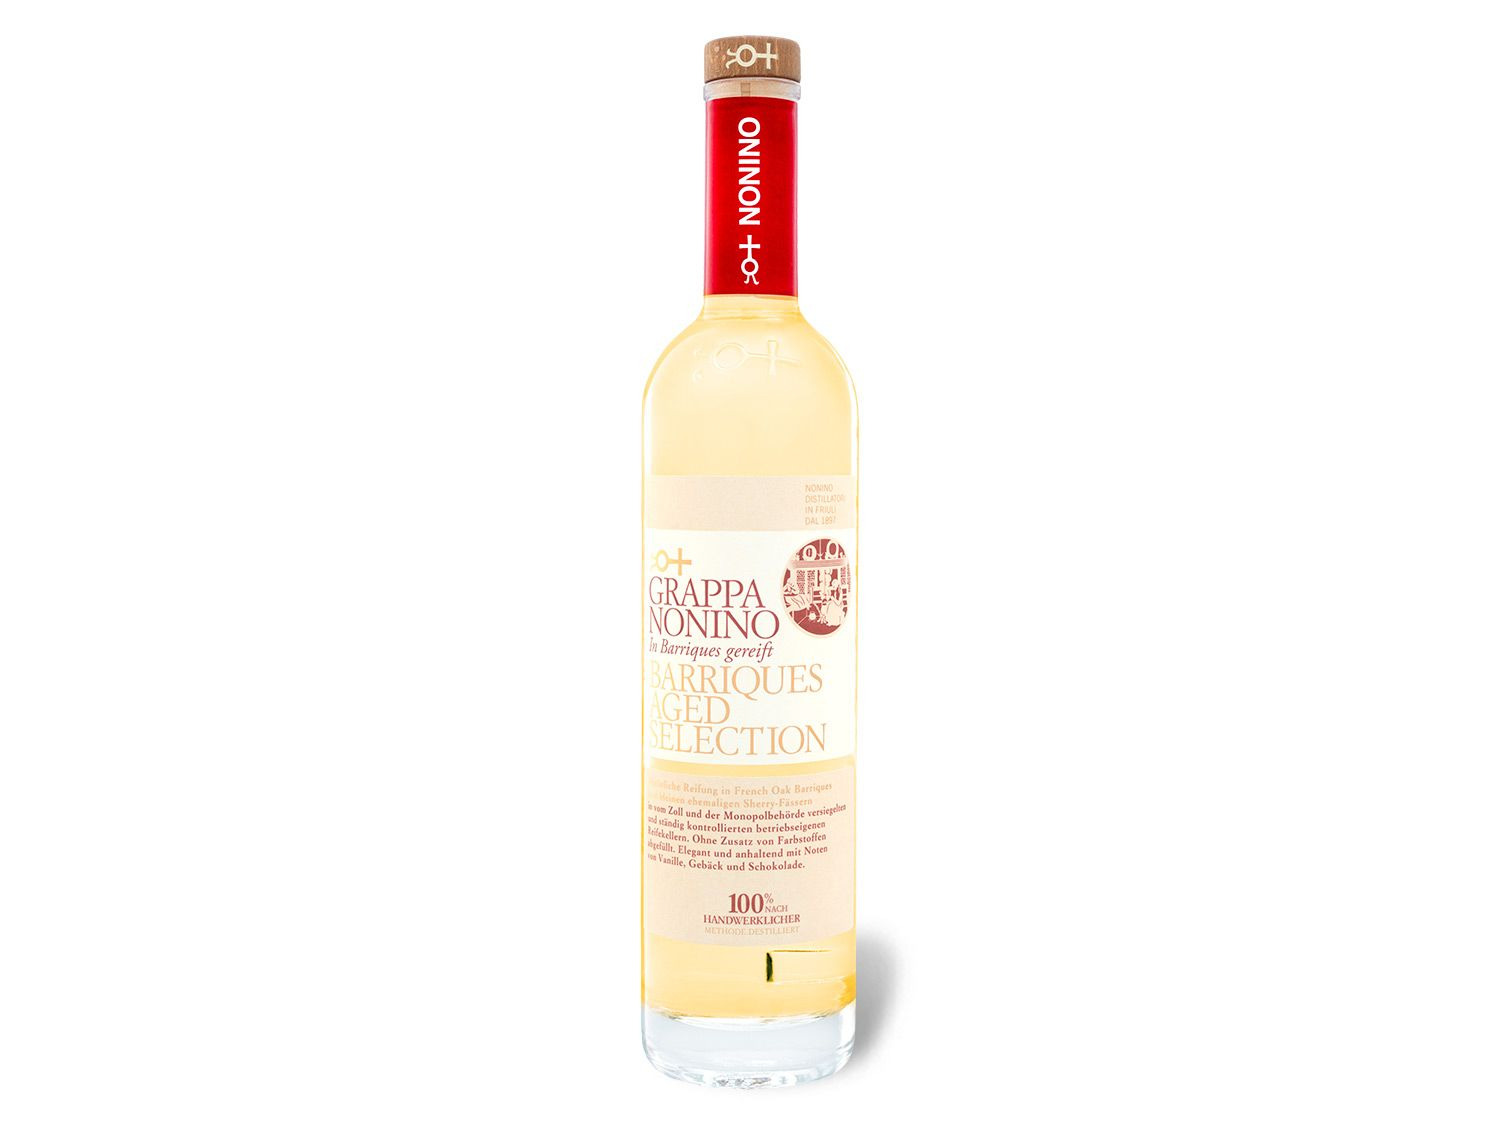 Nonino Grappa Barriques Aged Selection 41% Vol | LIDL